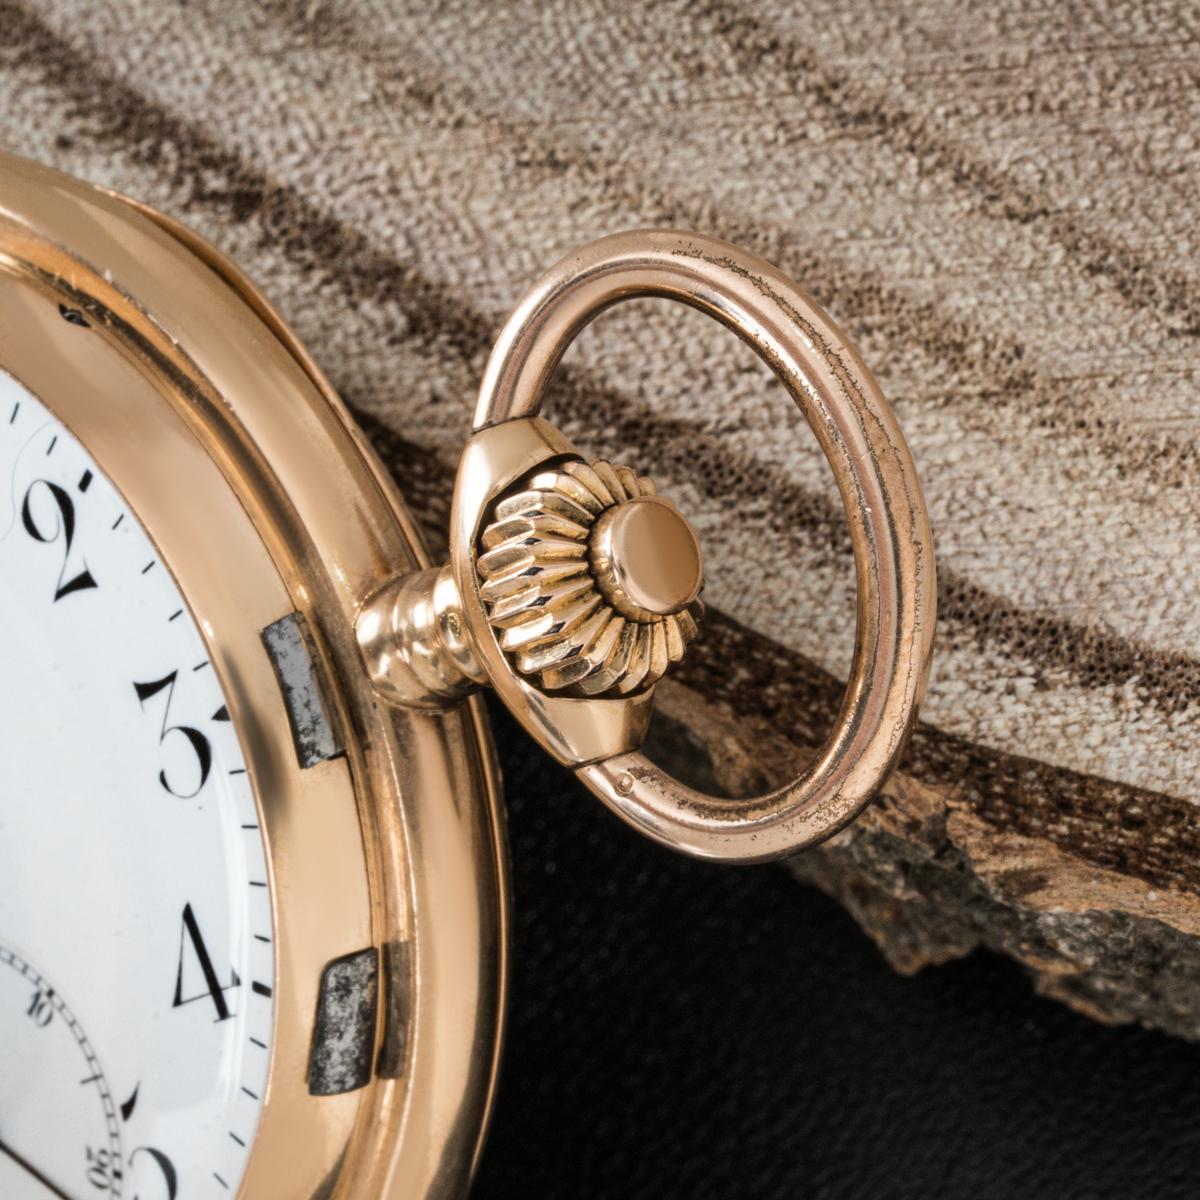 Volta Rose Gold Minute Repeater Keyless Lever Full Hunter Pocket Watch C1880 For Sale 1